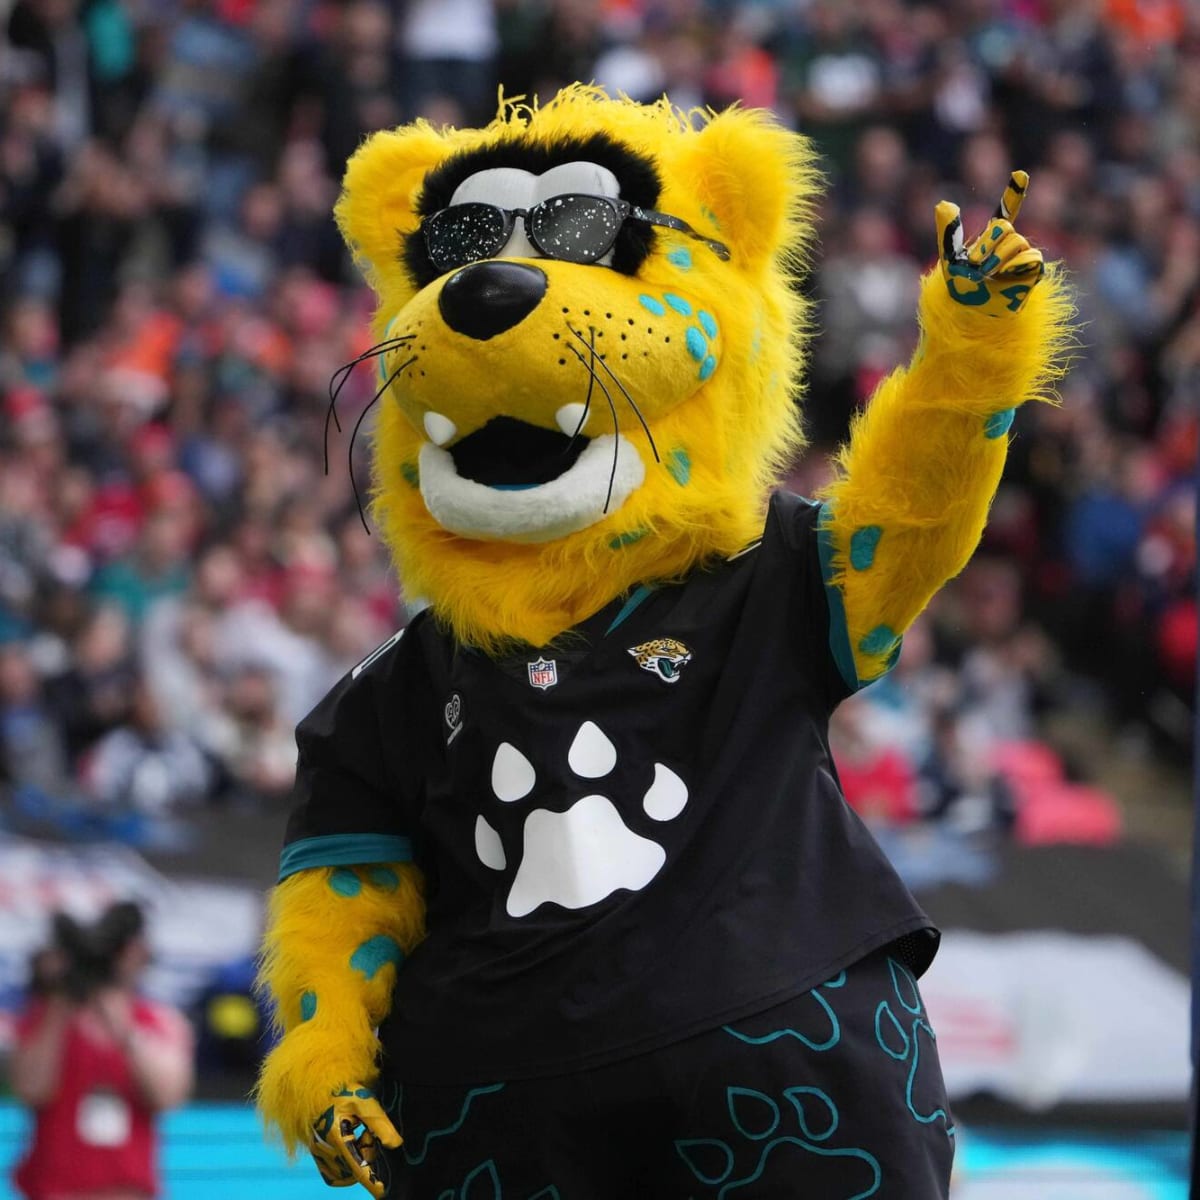 Watch: Jaguars mascot letting it all hang out during Sunday's game